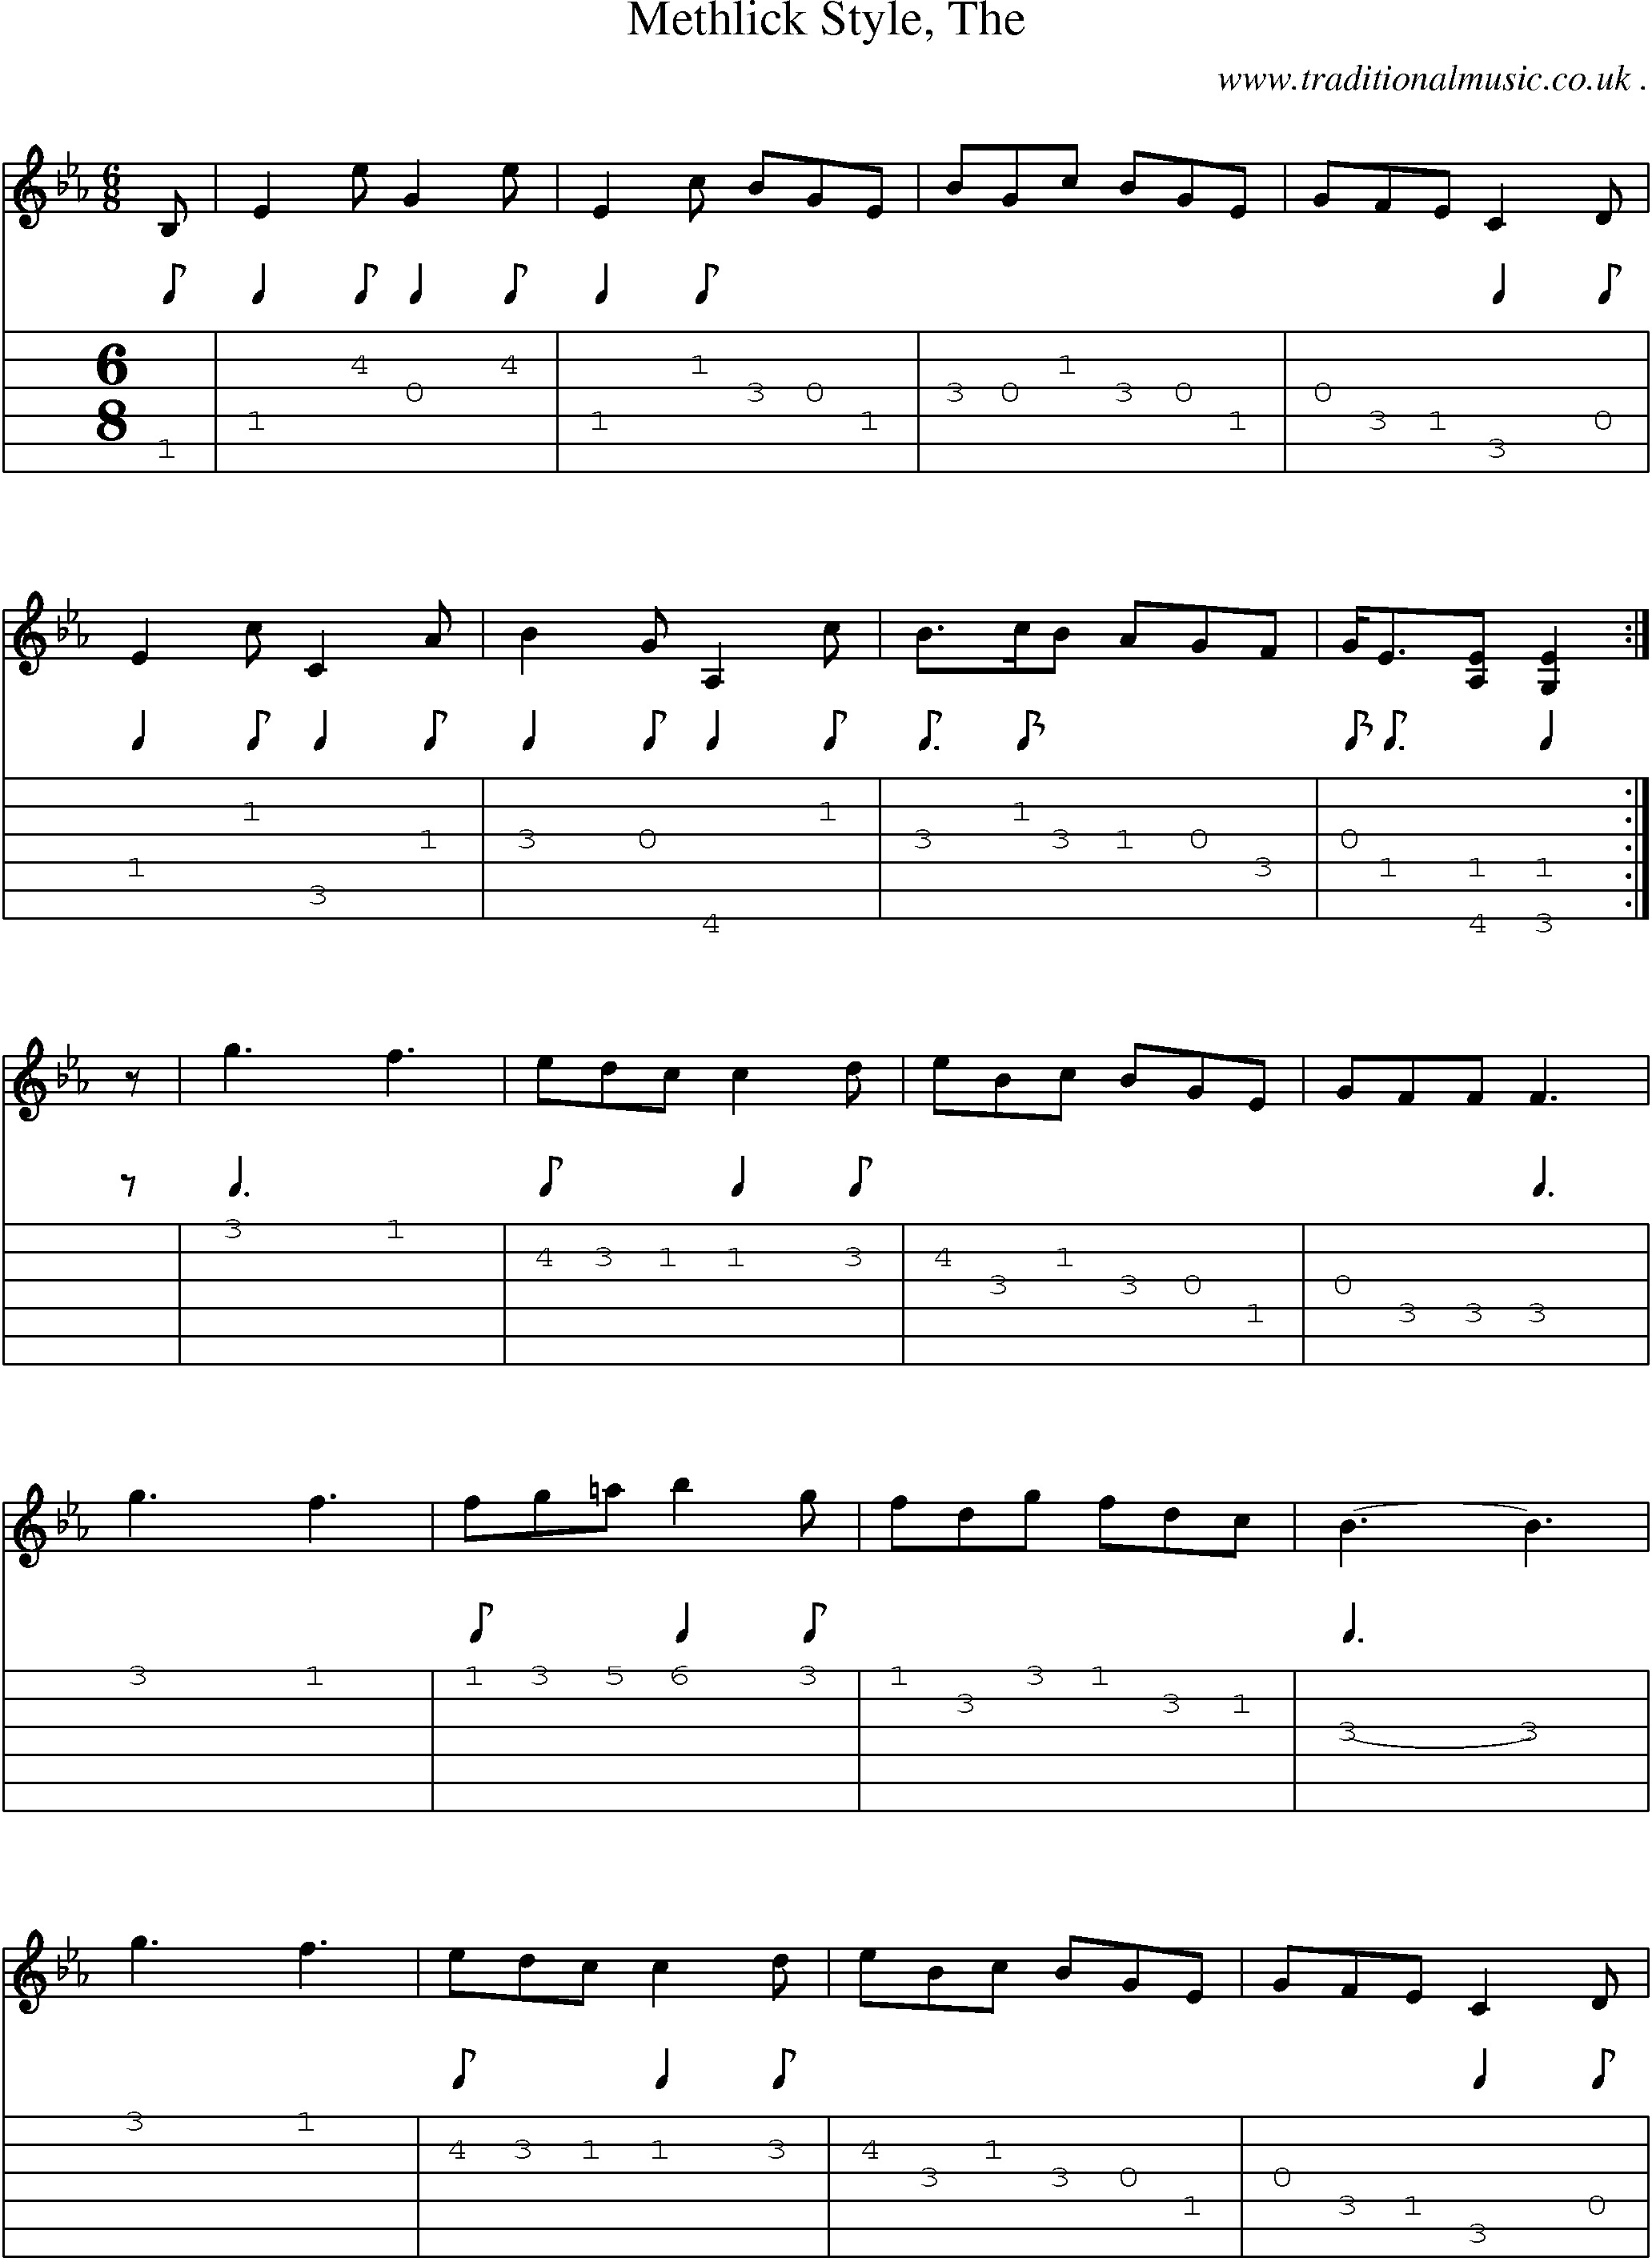 Sheet-music  score, Chords and Guitar Tabs for Methlick Style The